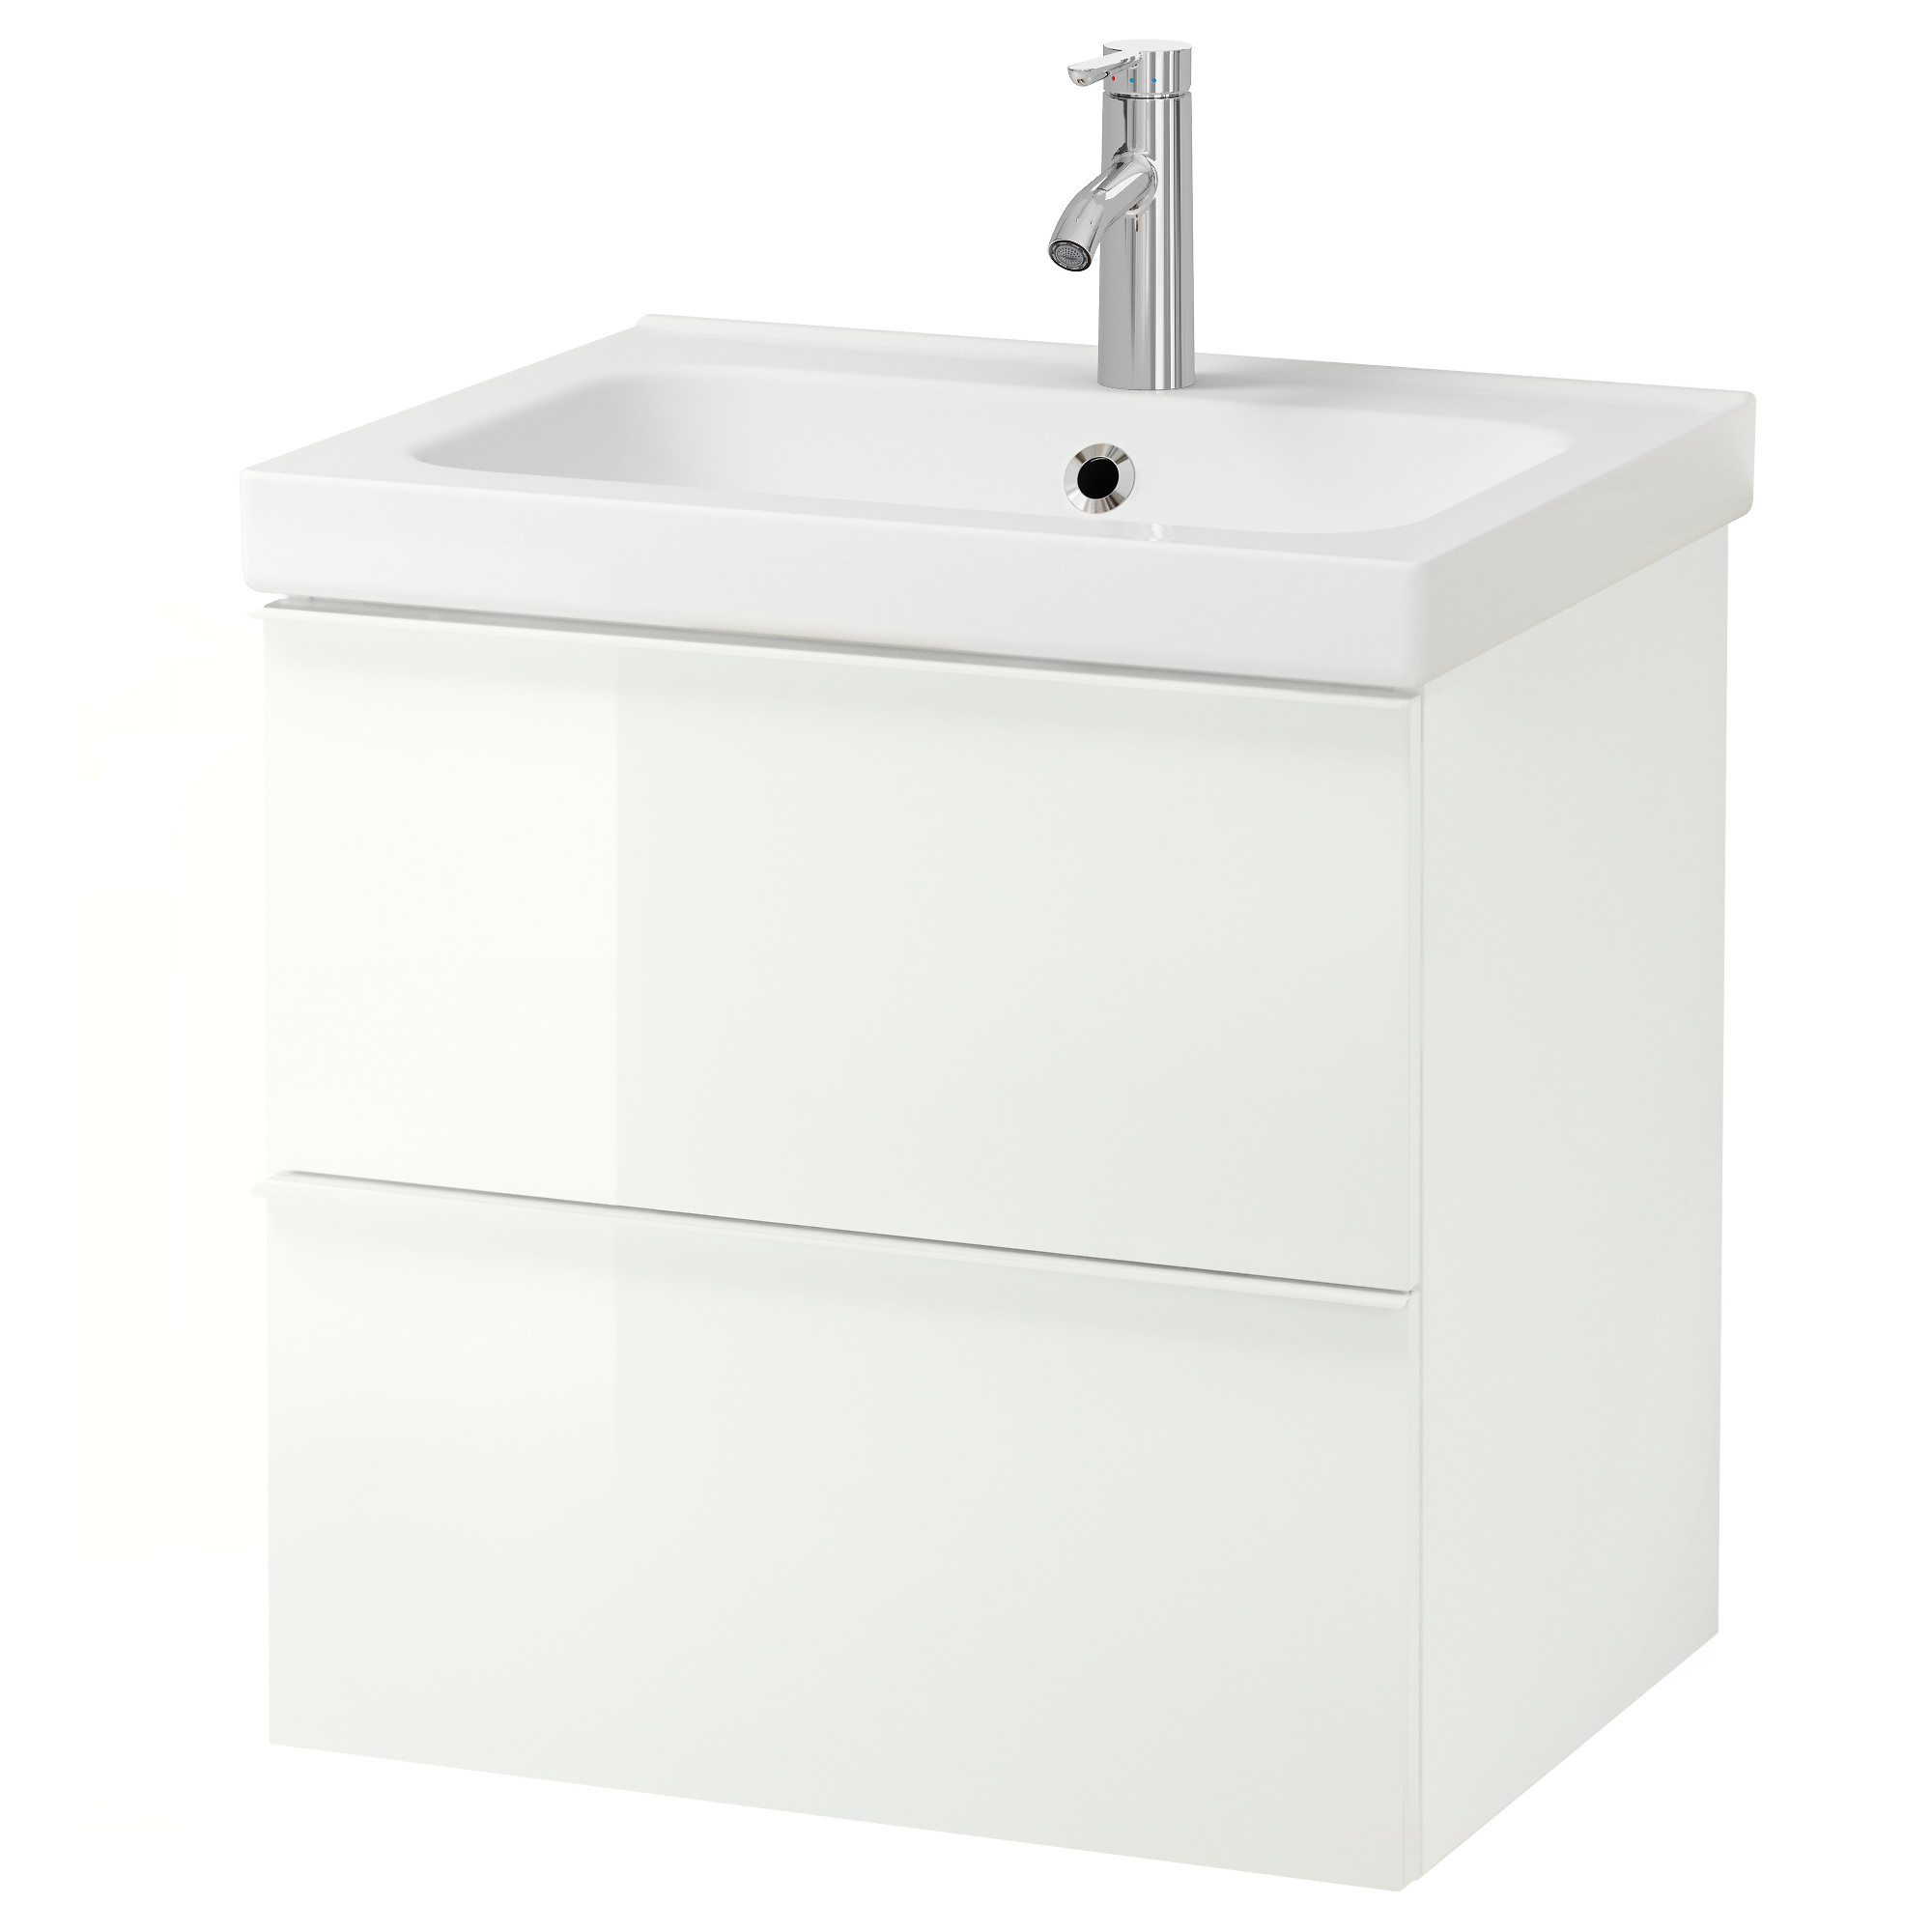 GODMORGON/ODENSVIK wash-stand with 2 drawers